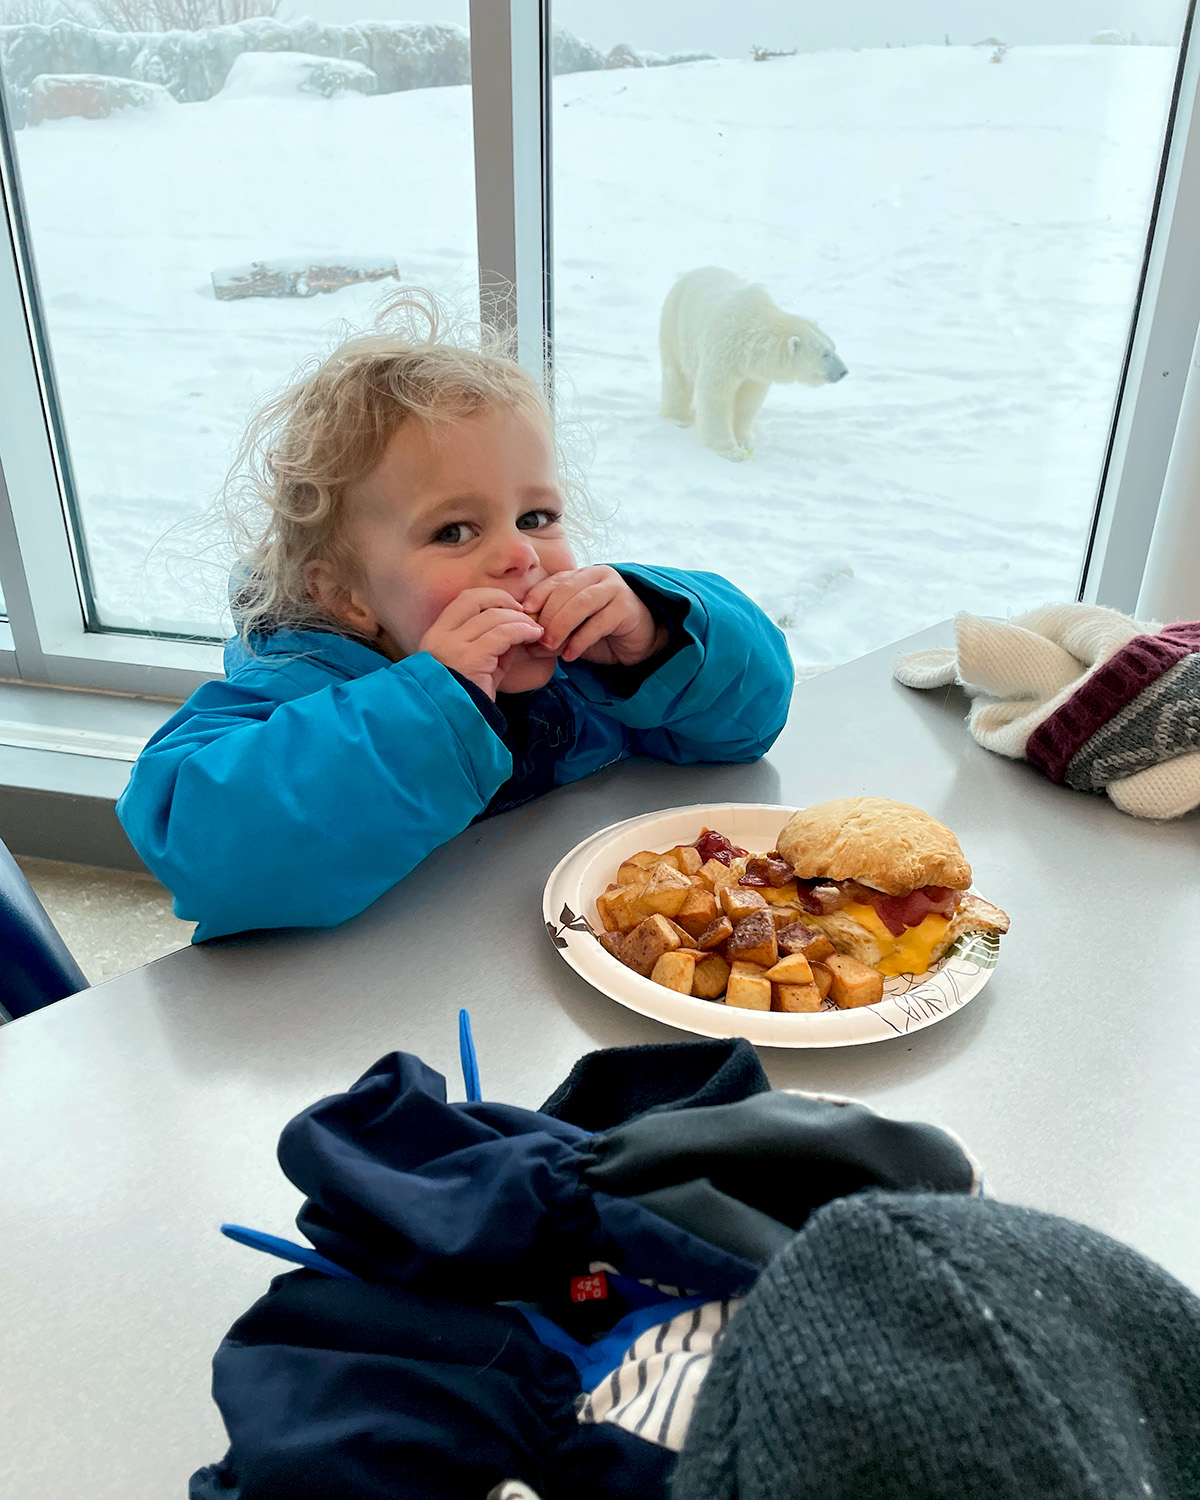 Child eats at the Tundra Grill with a polar bear in the background